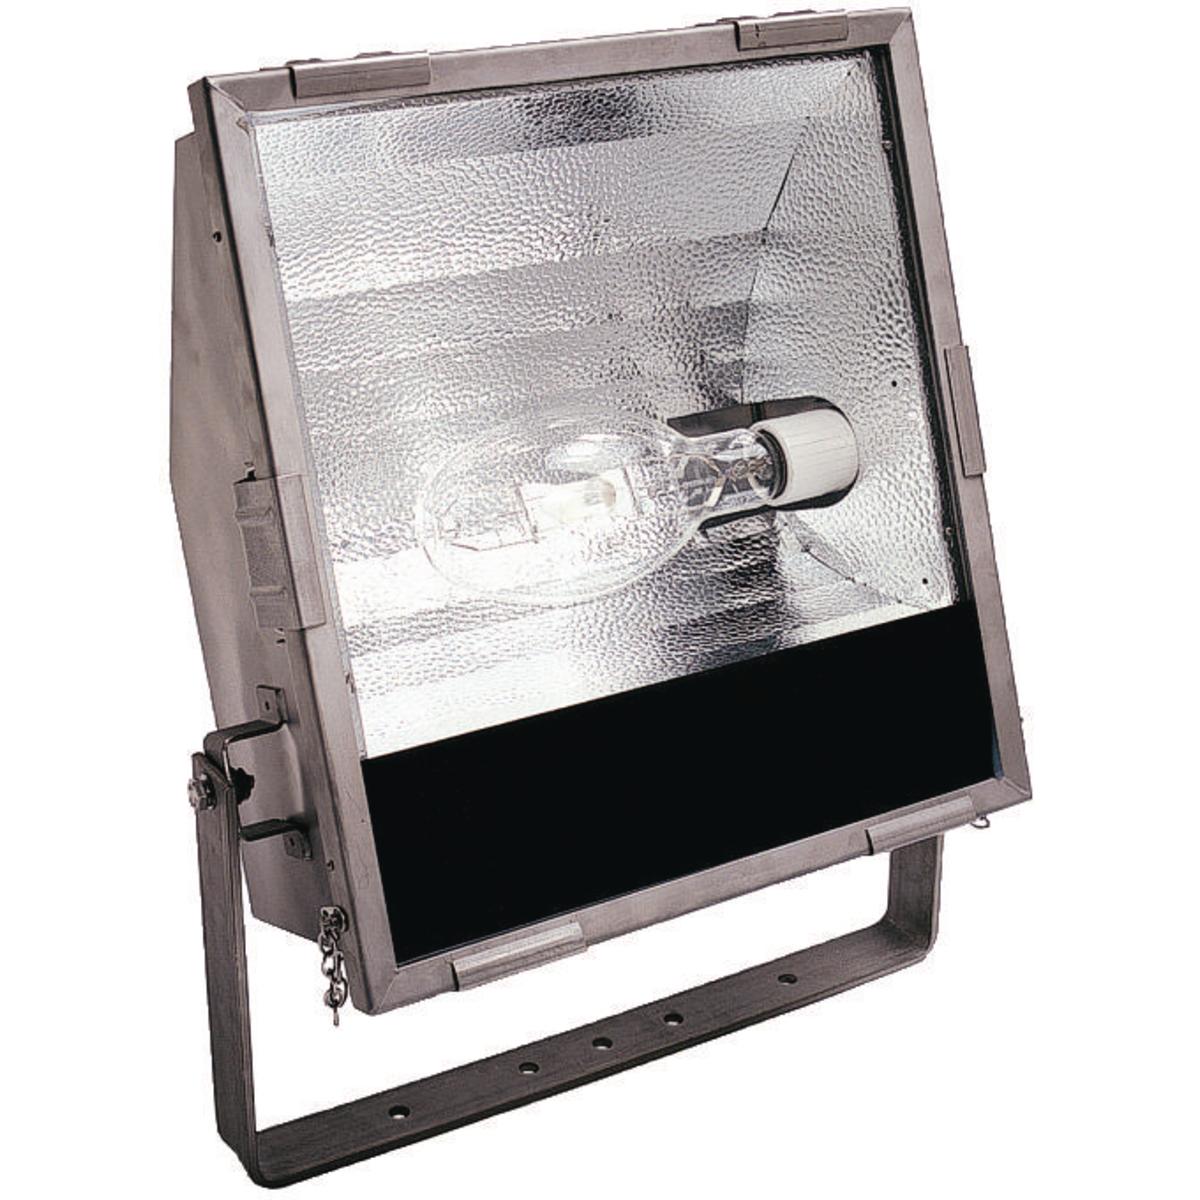 Hubbell KFS408SS KF Series - Stainless Steel 400 Watt High Pressure Sodium Marine Floodlight (Lamp Not Included) - 220/240V At 60Hz  ; Type 316 Stainless Steel Housing. 16-gauge housing ensures low corrosion and long life, reducing maintenance costs ; Rugged quick-release